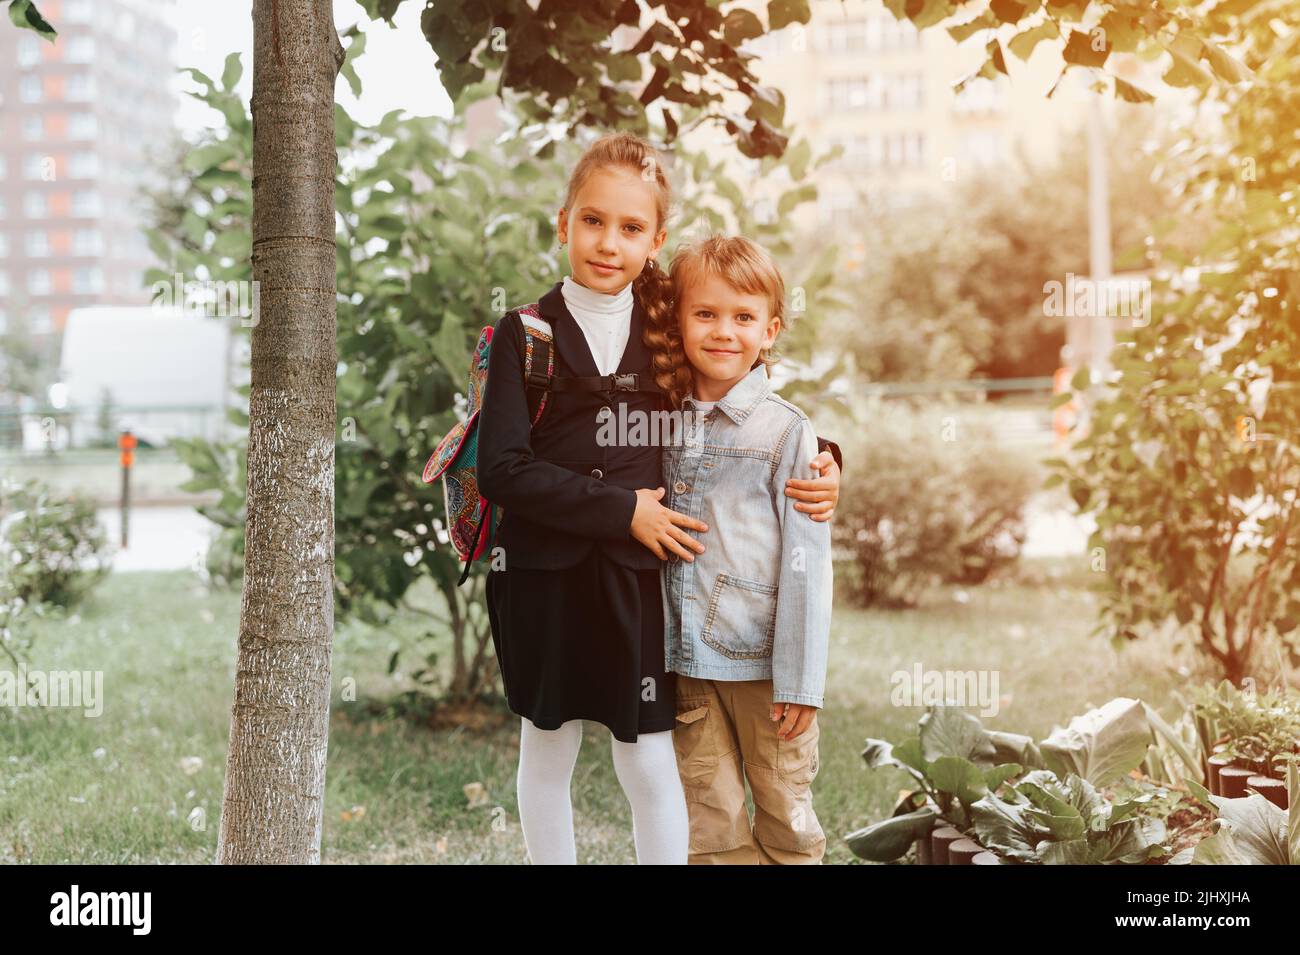 back to school. little happy kid pupil schoolgirl eight years old in fashion uniform with backpack and her preschool brother boy hug together ready go Stock Photo